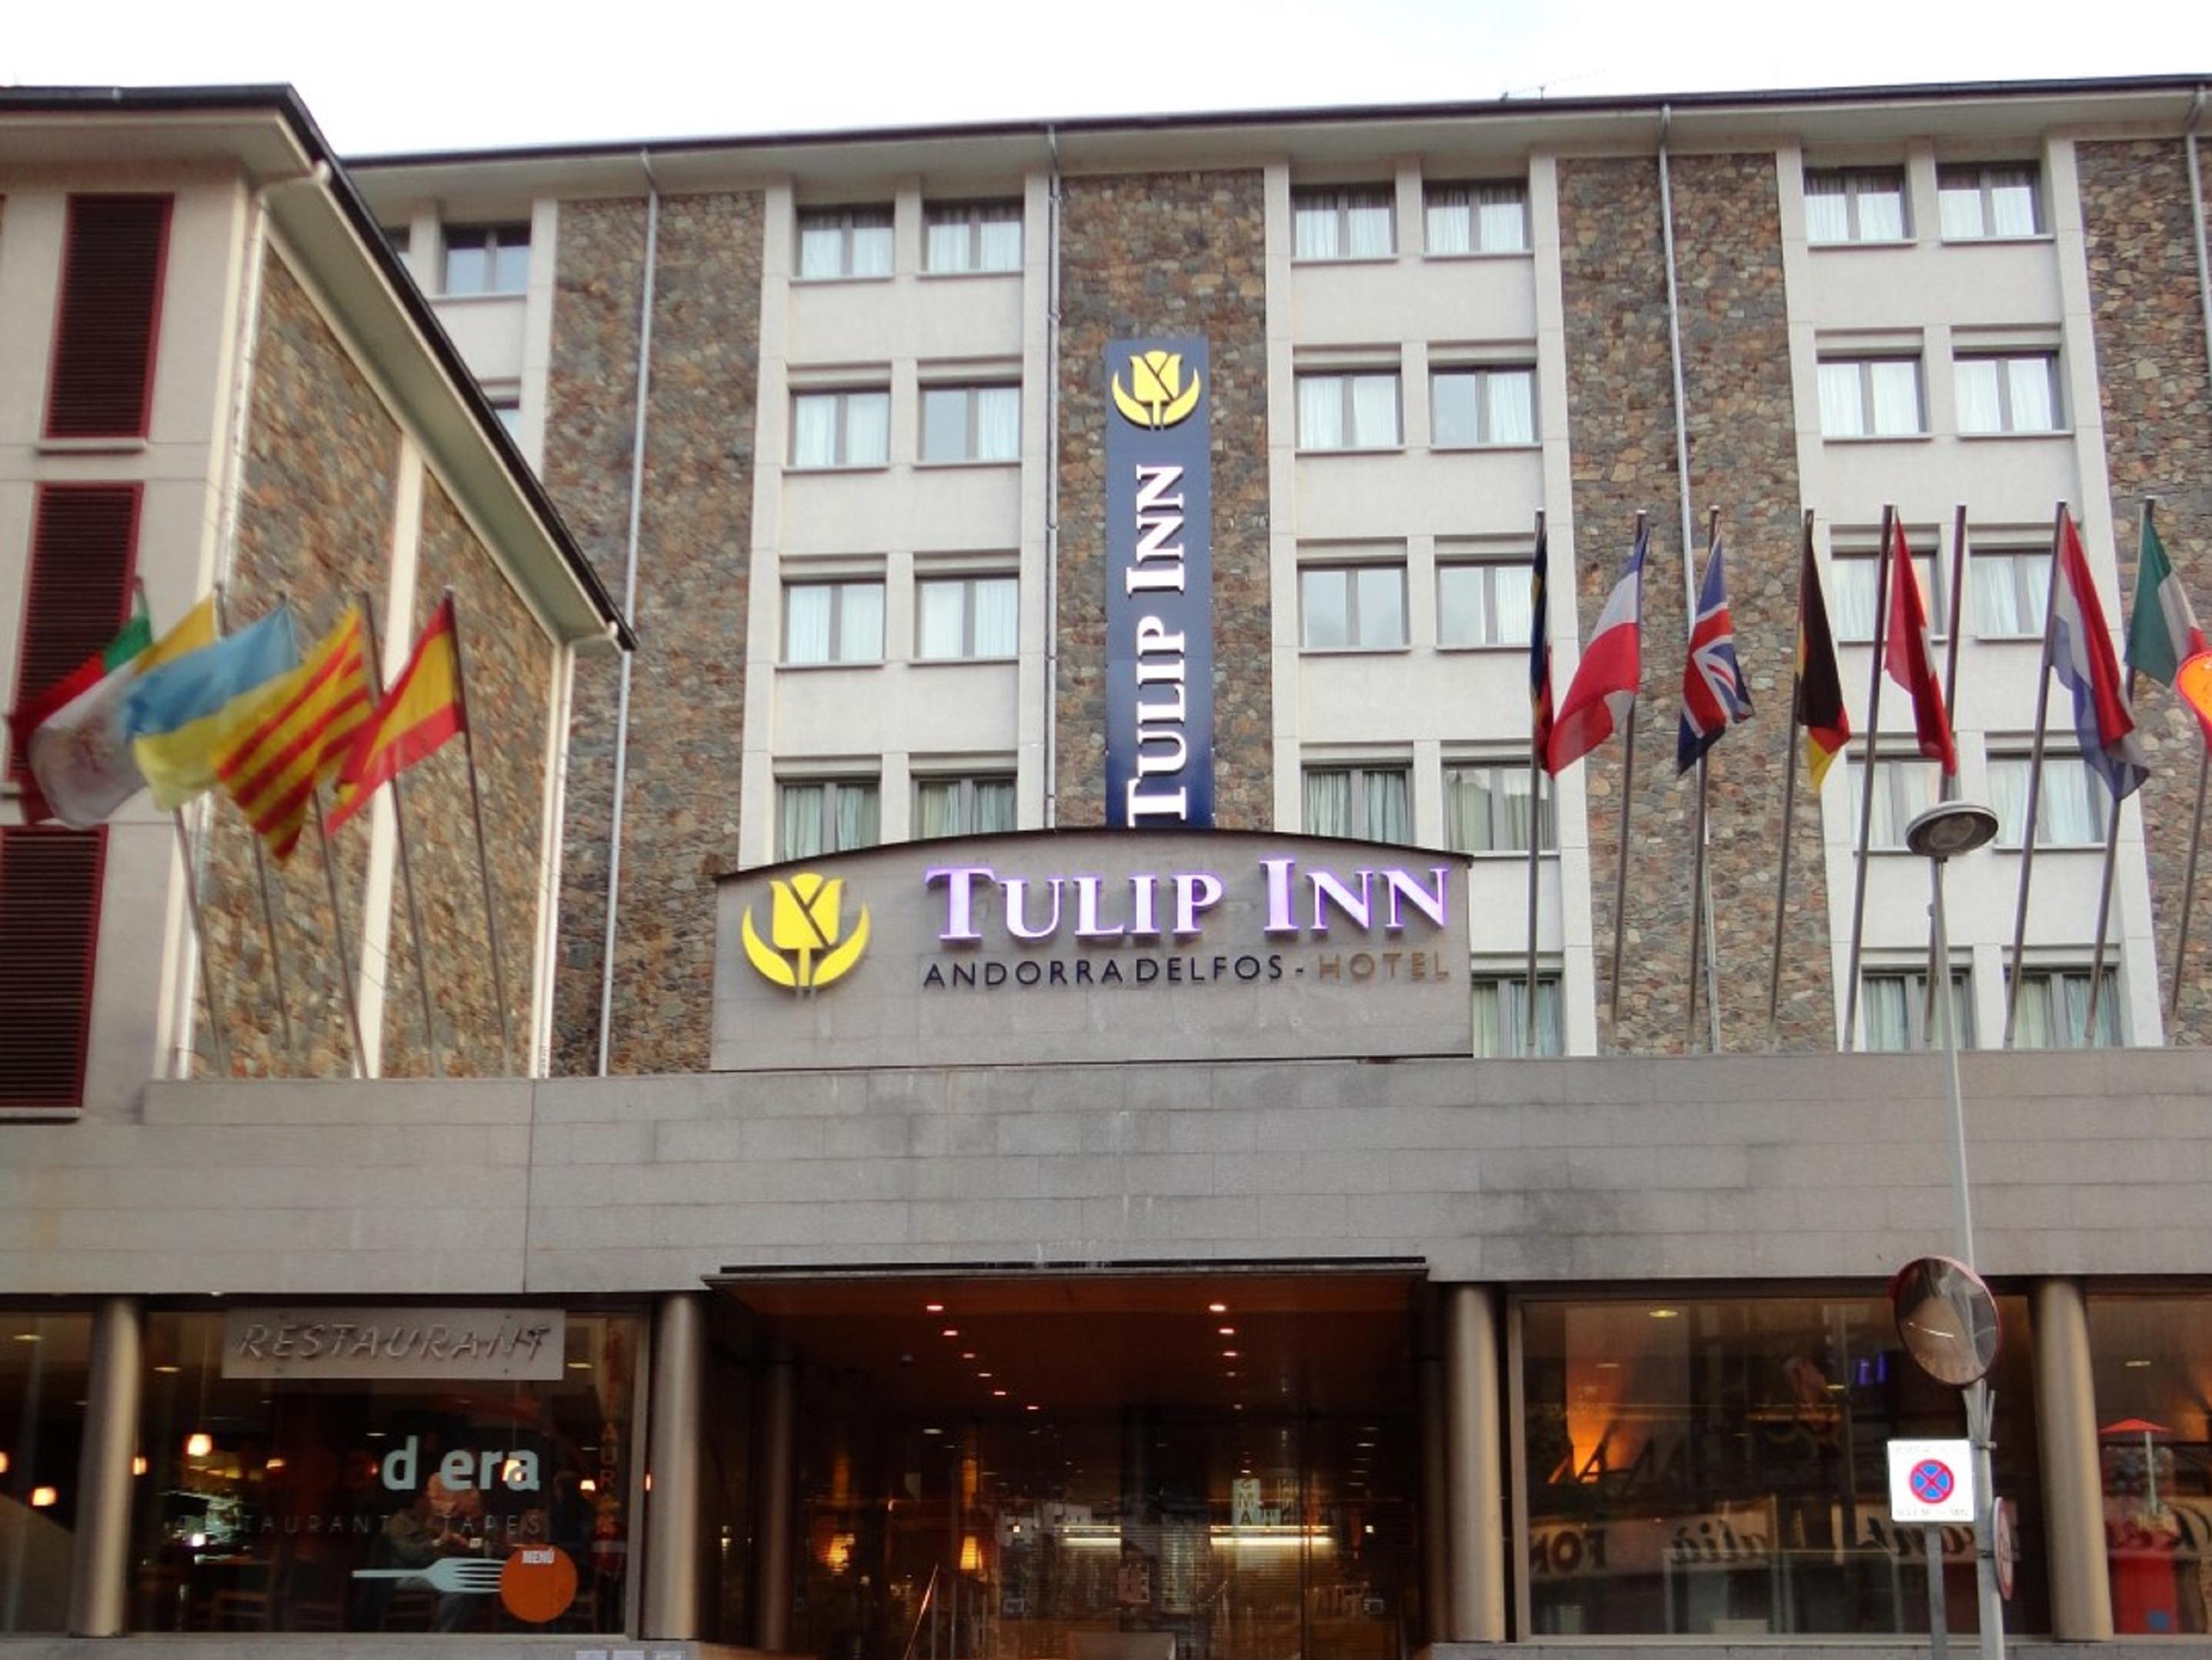 Tulip Inn Andorra Delfos Hotel Andorra FAQ 2017, What facilities are there in Tulip Inn Andorra Delfos Hotel Andorra 2017, What Languages Spoken are Supported in Tulip Inn Andorra Delfos Hotel Andorra 2017, Which payment cards are accepted in Tulip Inn Andorra Delfos Hotel Andorra , Andorra Tulip Inn Andorra Delfos Hotel room facilities and services Q&A 2017, Andorra Tulip Inn Andorra Delfos Hotel online booking services 2017, Andorra Tulip Inn Andorra Delfos Hotel address 2017, Andorra Tulip Inn Andorra Delfos Hotel telephone number 2017,Andorra Tulip Inn Andorra Delfos Hotel map 2017, Andorra Tulip Inn Andorra Delfos Hotel traffic guide 2017, how to go Andorra Tulip Inn Andorra Delfos Hotel, Andorra Tulip Inn Andorra Delfos Hotel booking online 2017, Andorra Tulip Inn Andorra Delfos Hotel room types 2017.